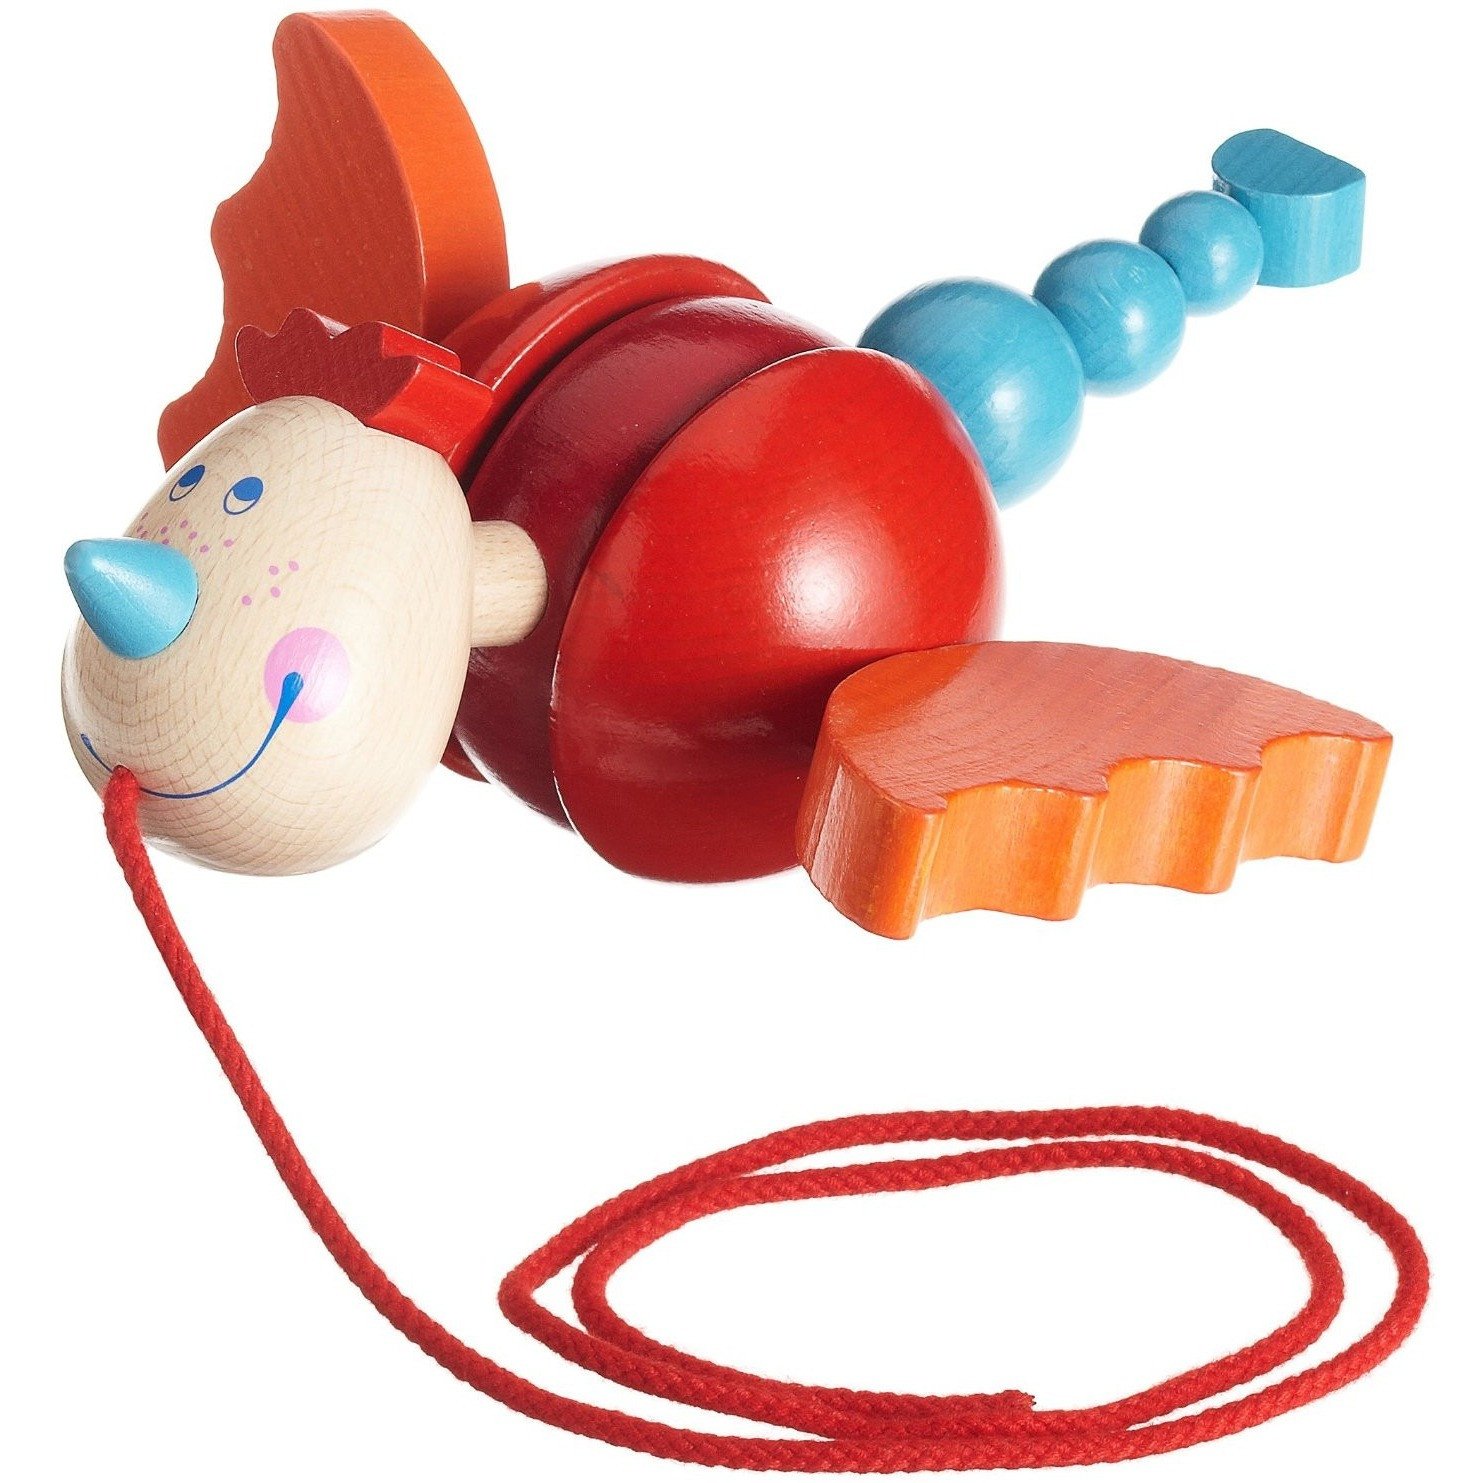 HABA Diego Dragon Pull toy | Push, Pull, and Ride-On Toys